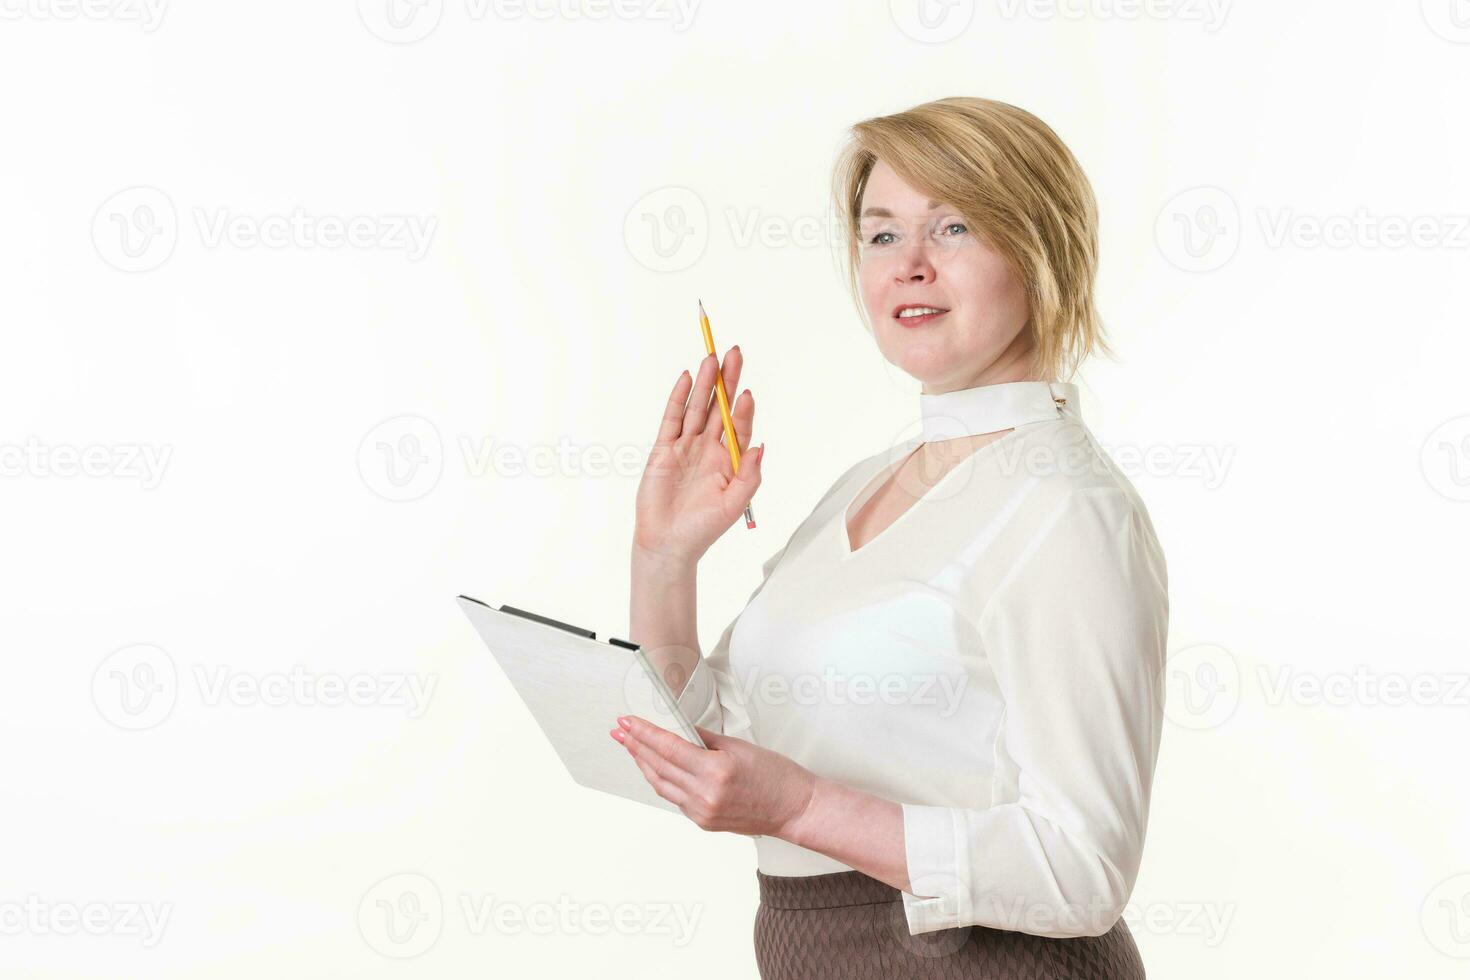 Blonde woman wearing in white blouse holding clipboard and pencil in hands, looking away and smiling photo